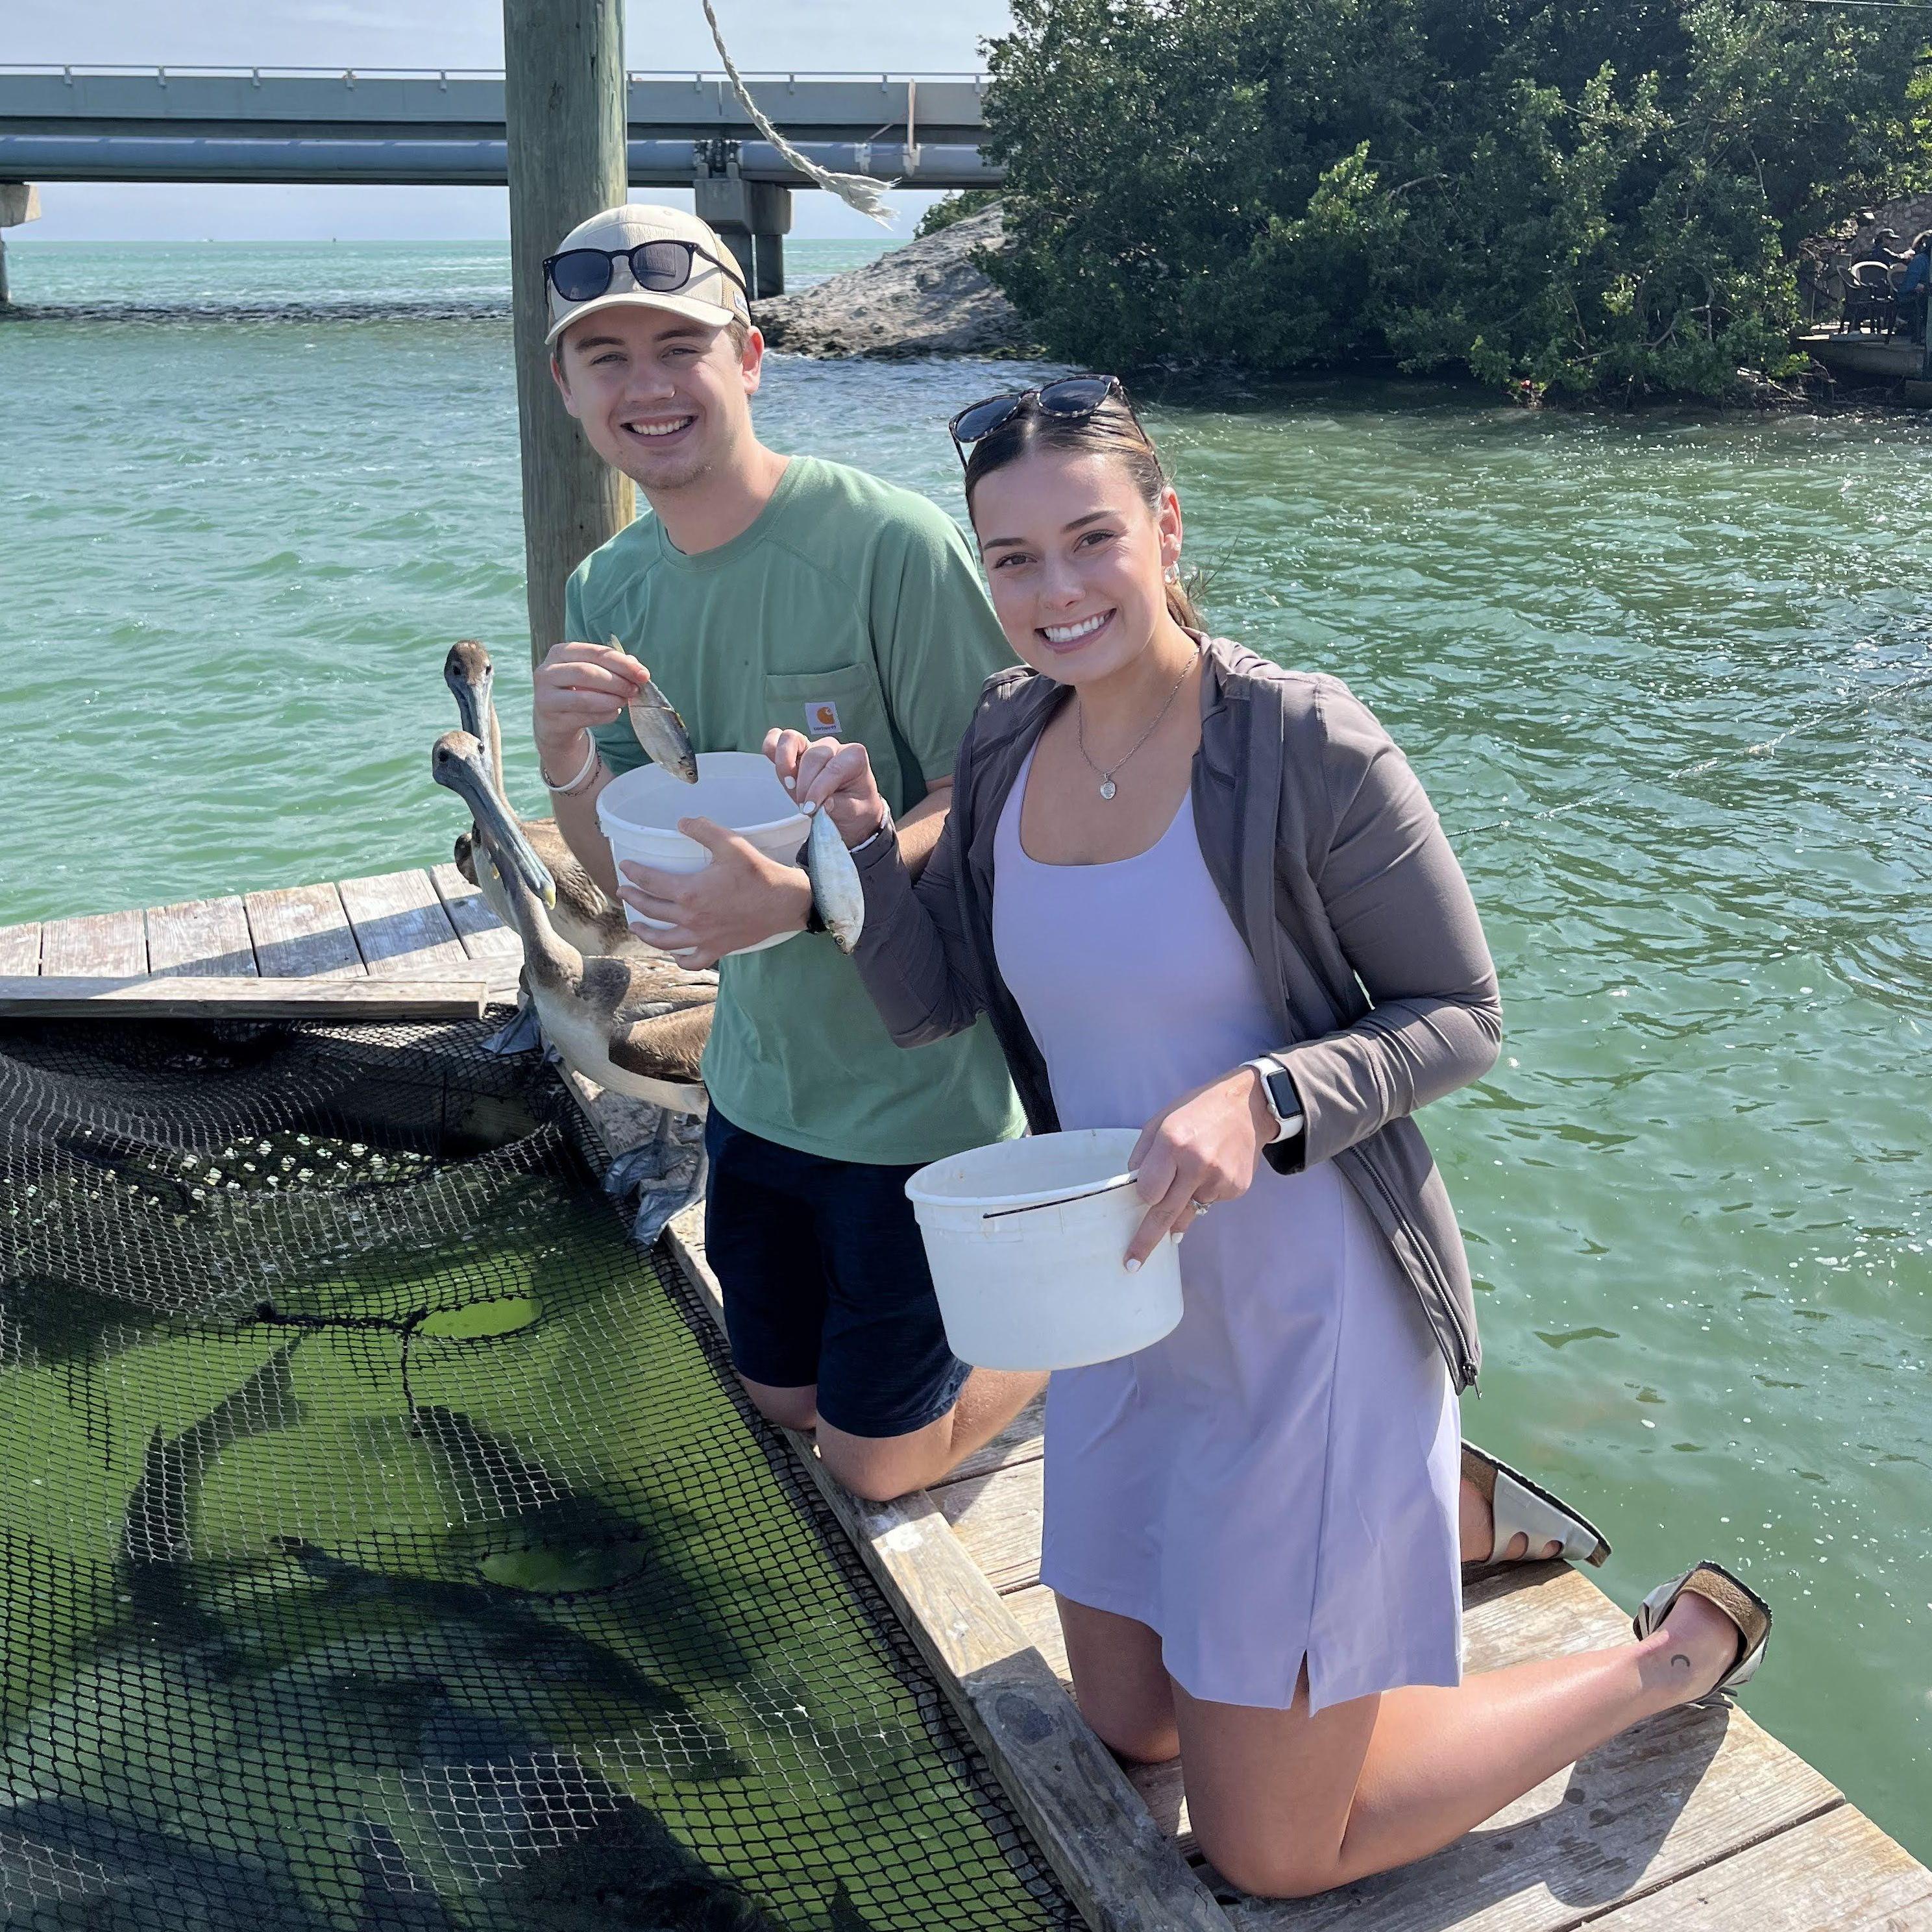 Our trip to Florida, feeding the fish and fighting off the pelicans